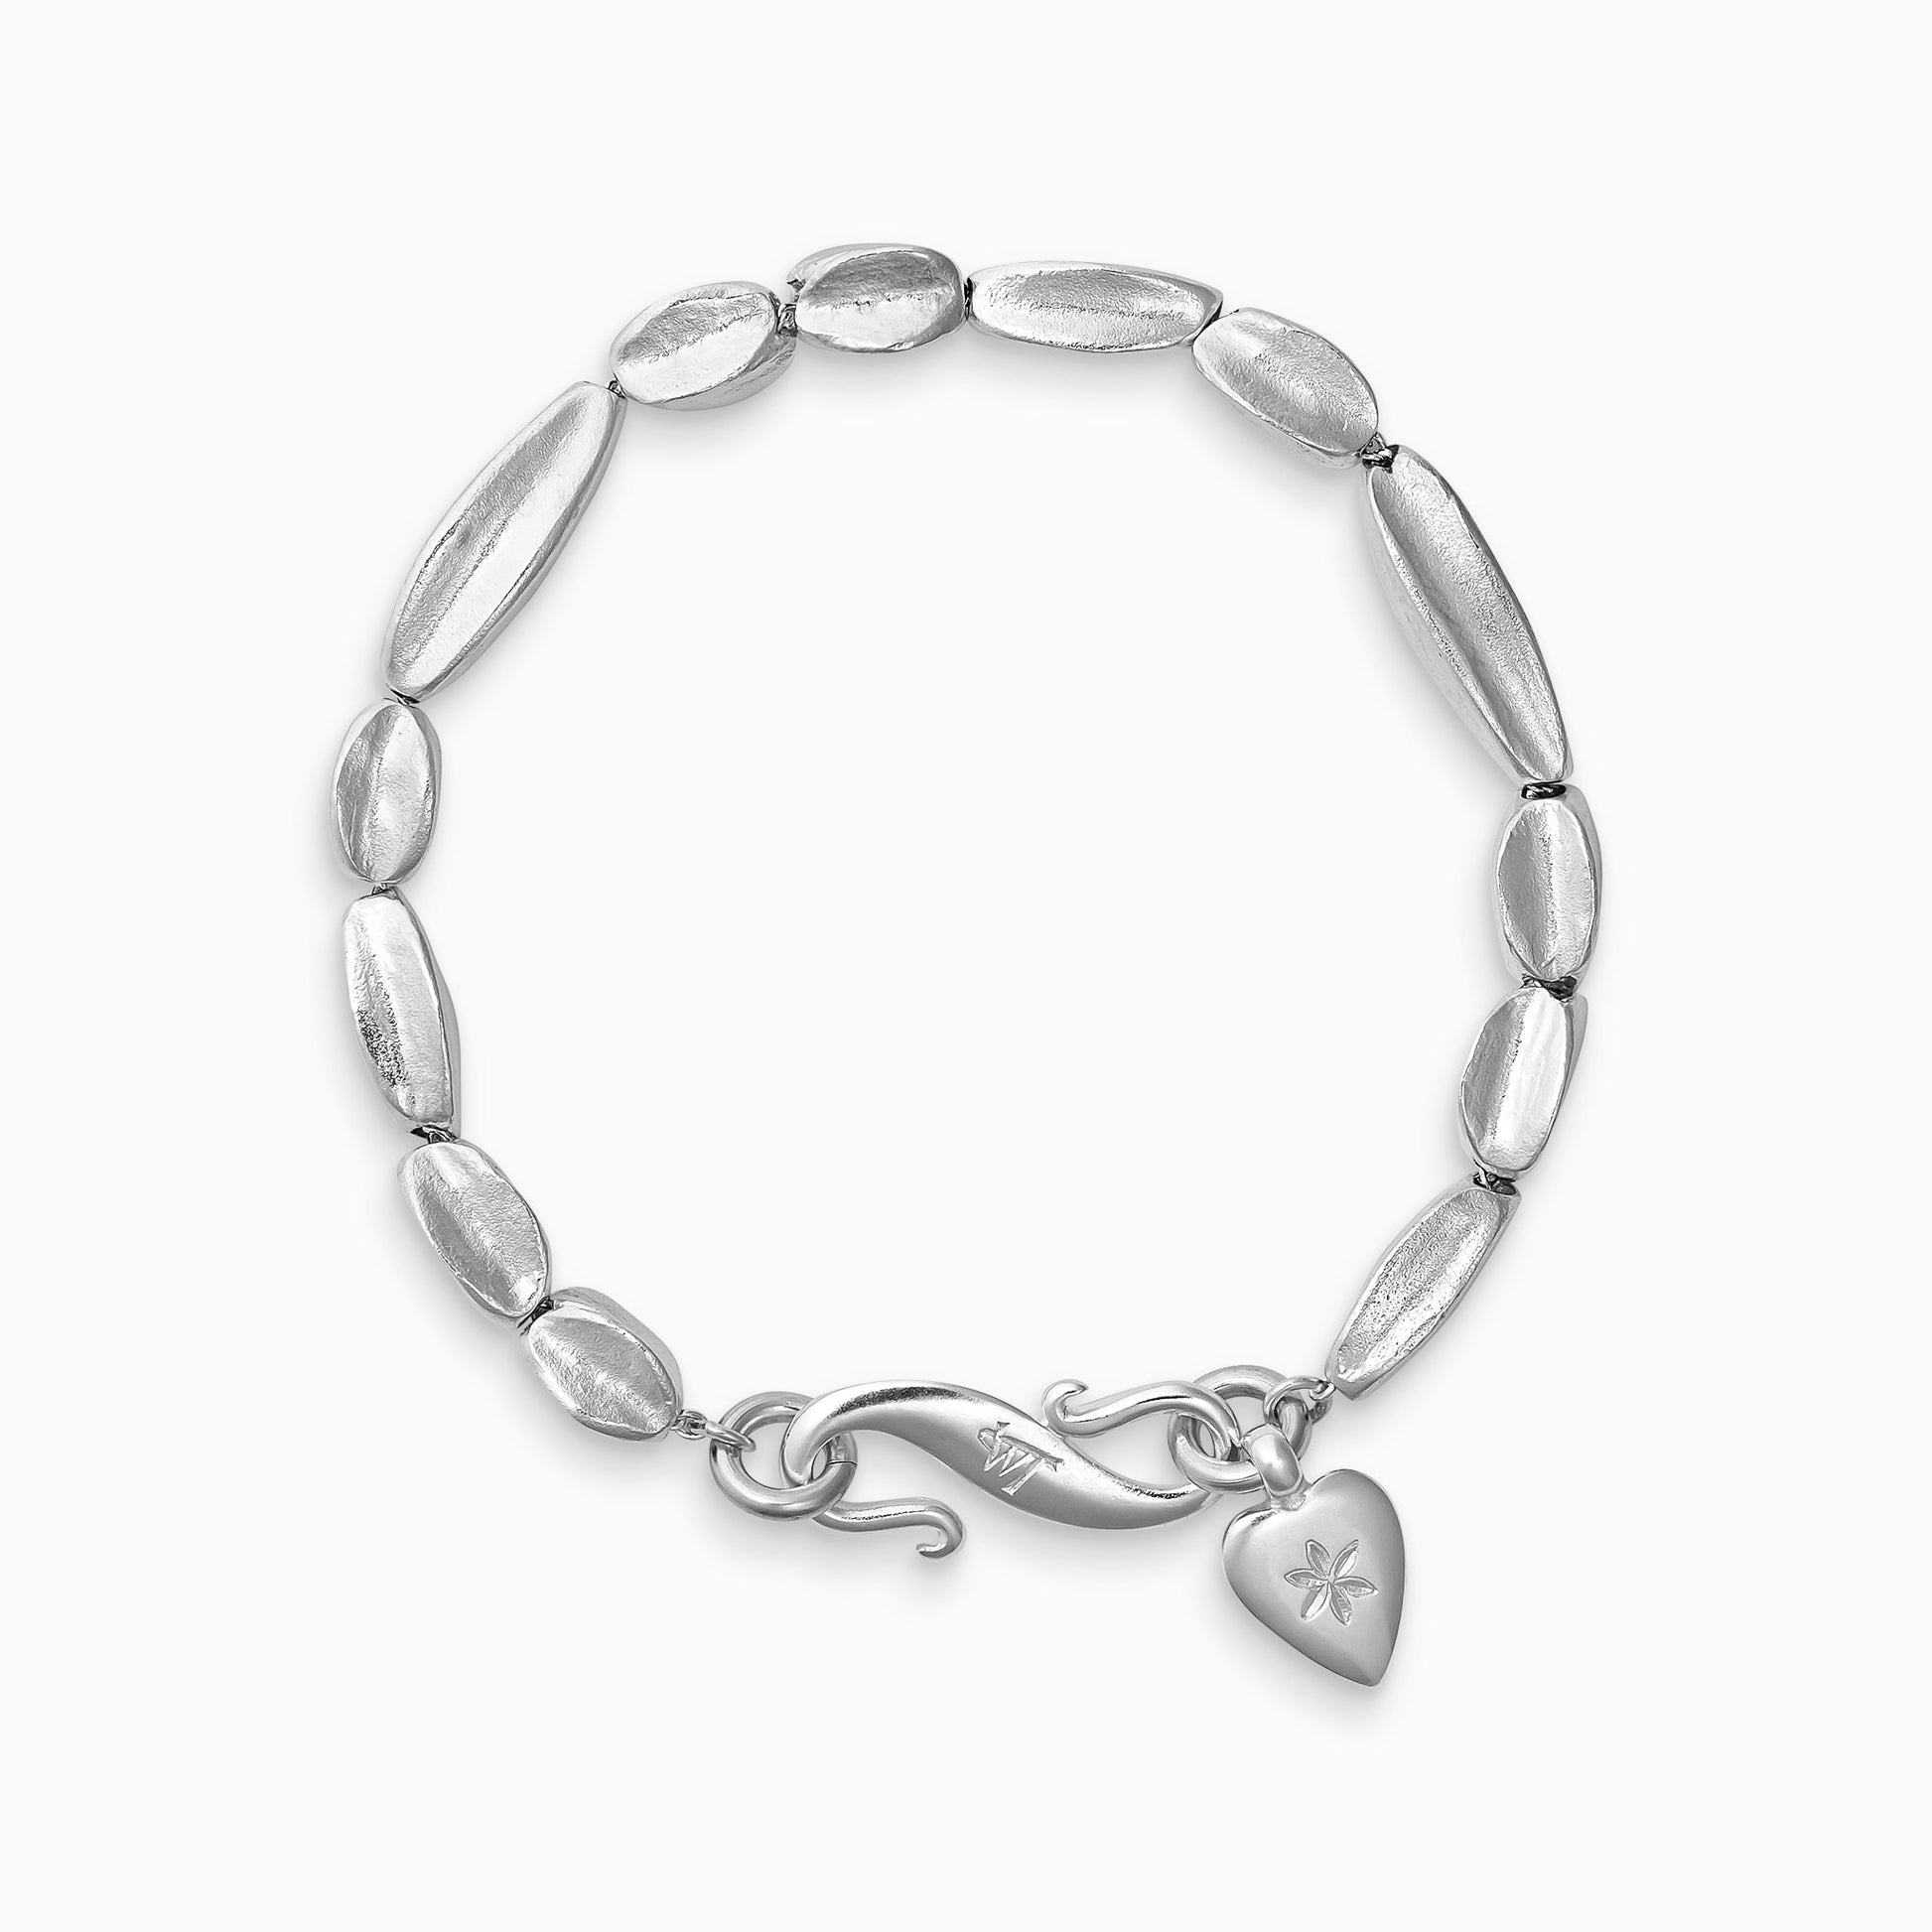 A recycled Silver bracelet of handmade organic, concave, square section textured ‘Baluba’ beads. Finished with a smooth heart shaped charm, engraved with a 6 petal flower and our signature ’S’ clasp.Bracelet length 210mm.. Beads varying lengths from 10mm to 40mm. Cross section of each bead approximately 6mm.